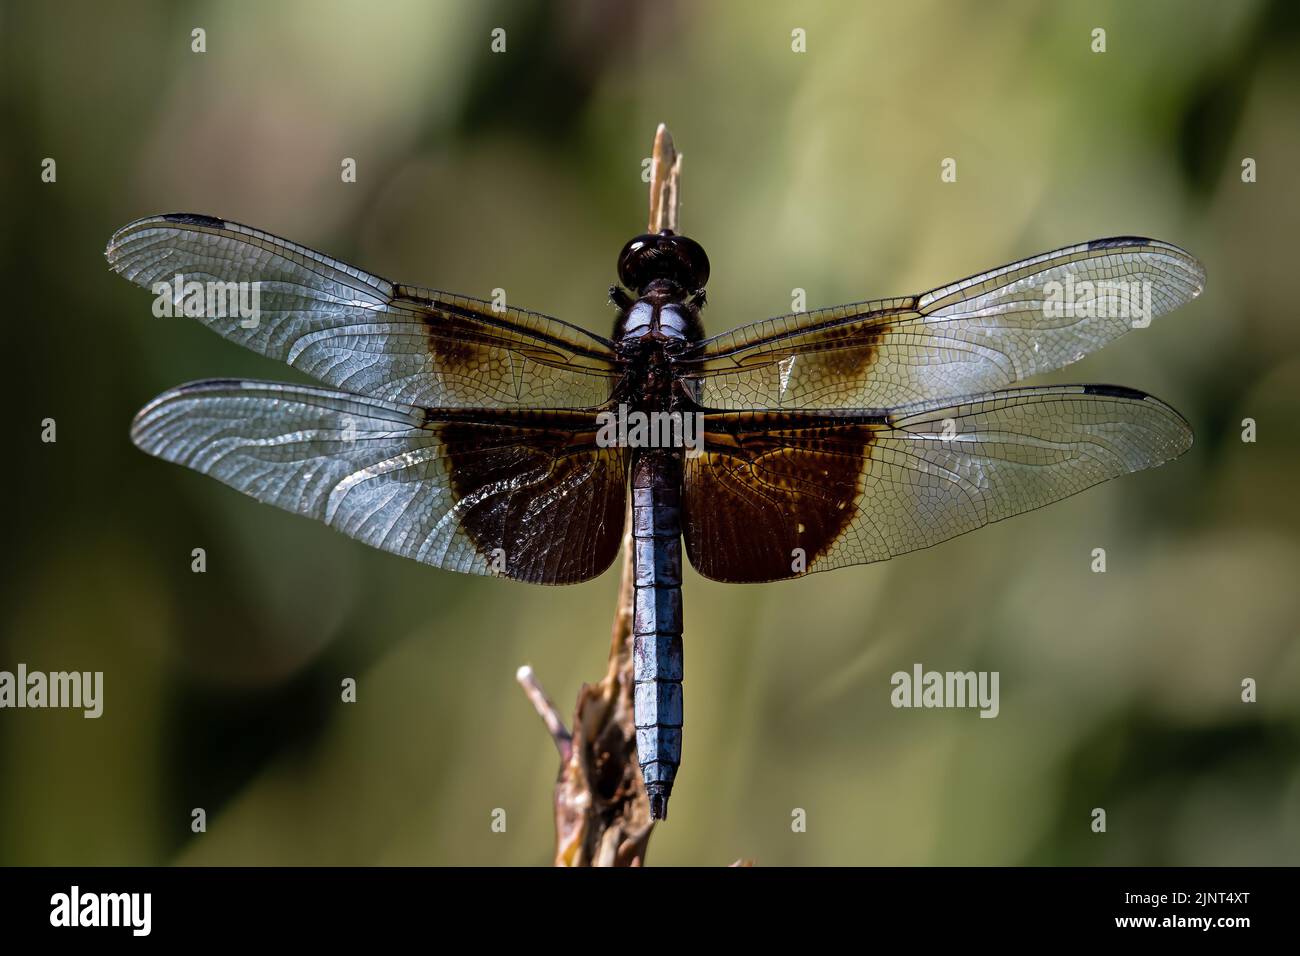 Widow Skimmer on plant stem.  It is a distinctive black and gray dragonfly with boldly marked wings. It perches on plant stems. Stock Photo